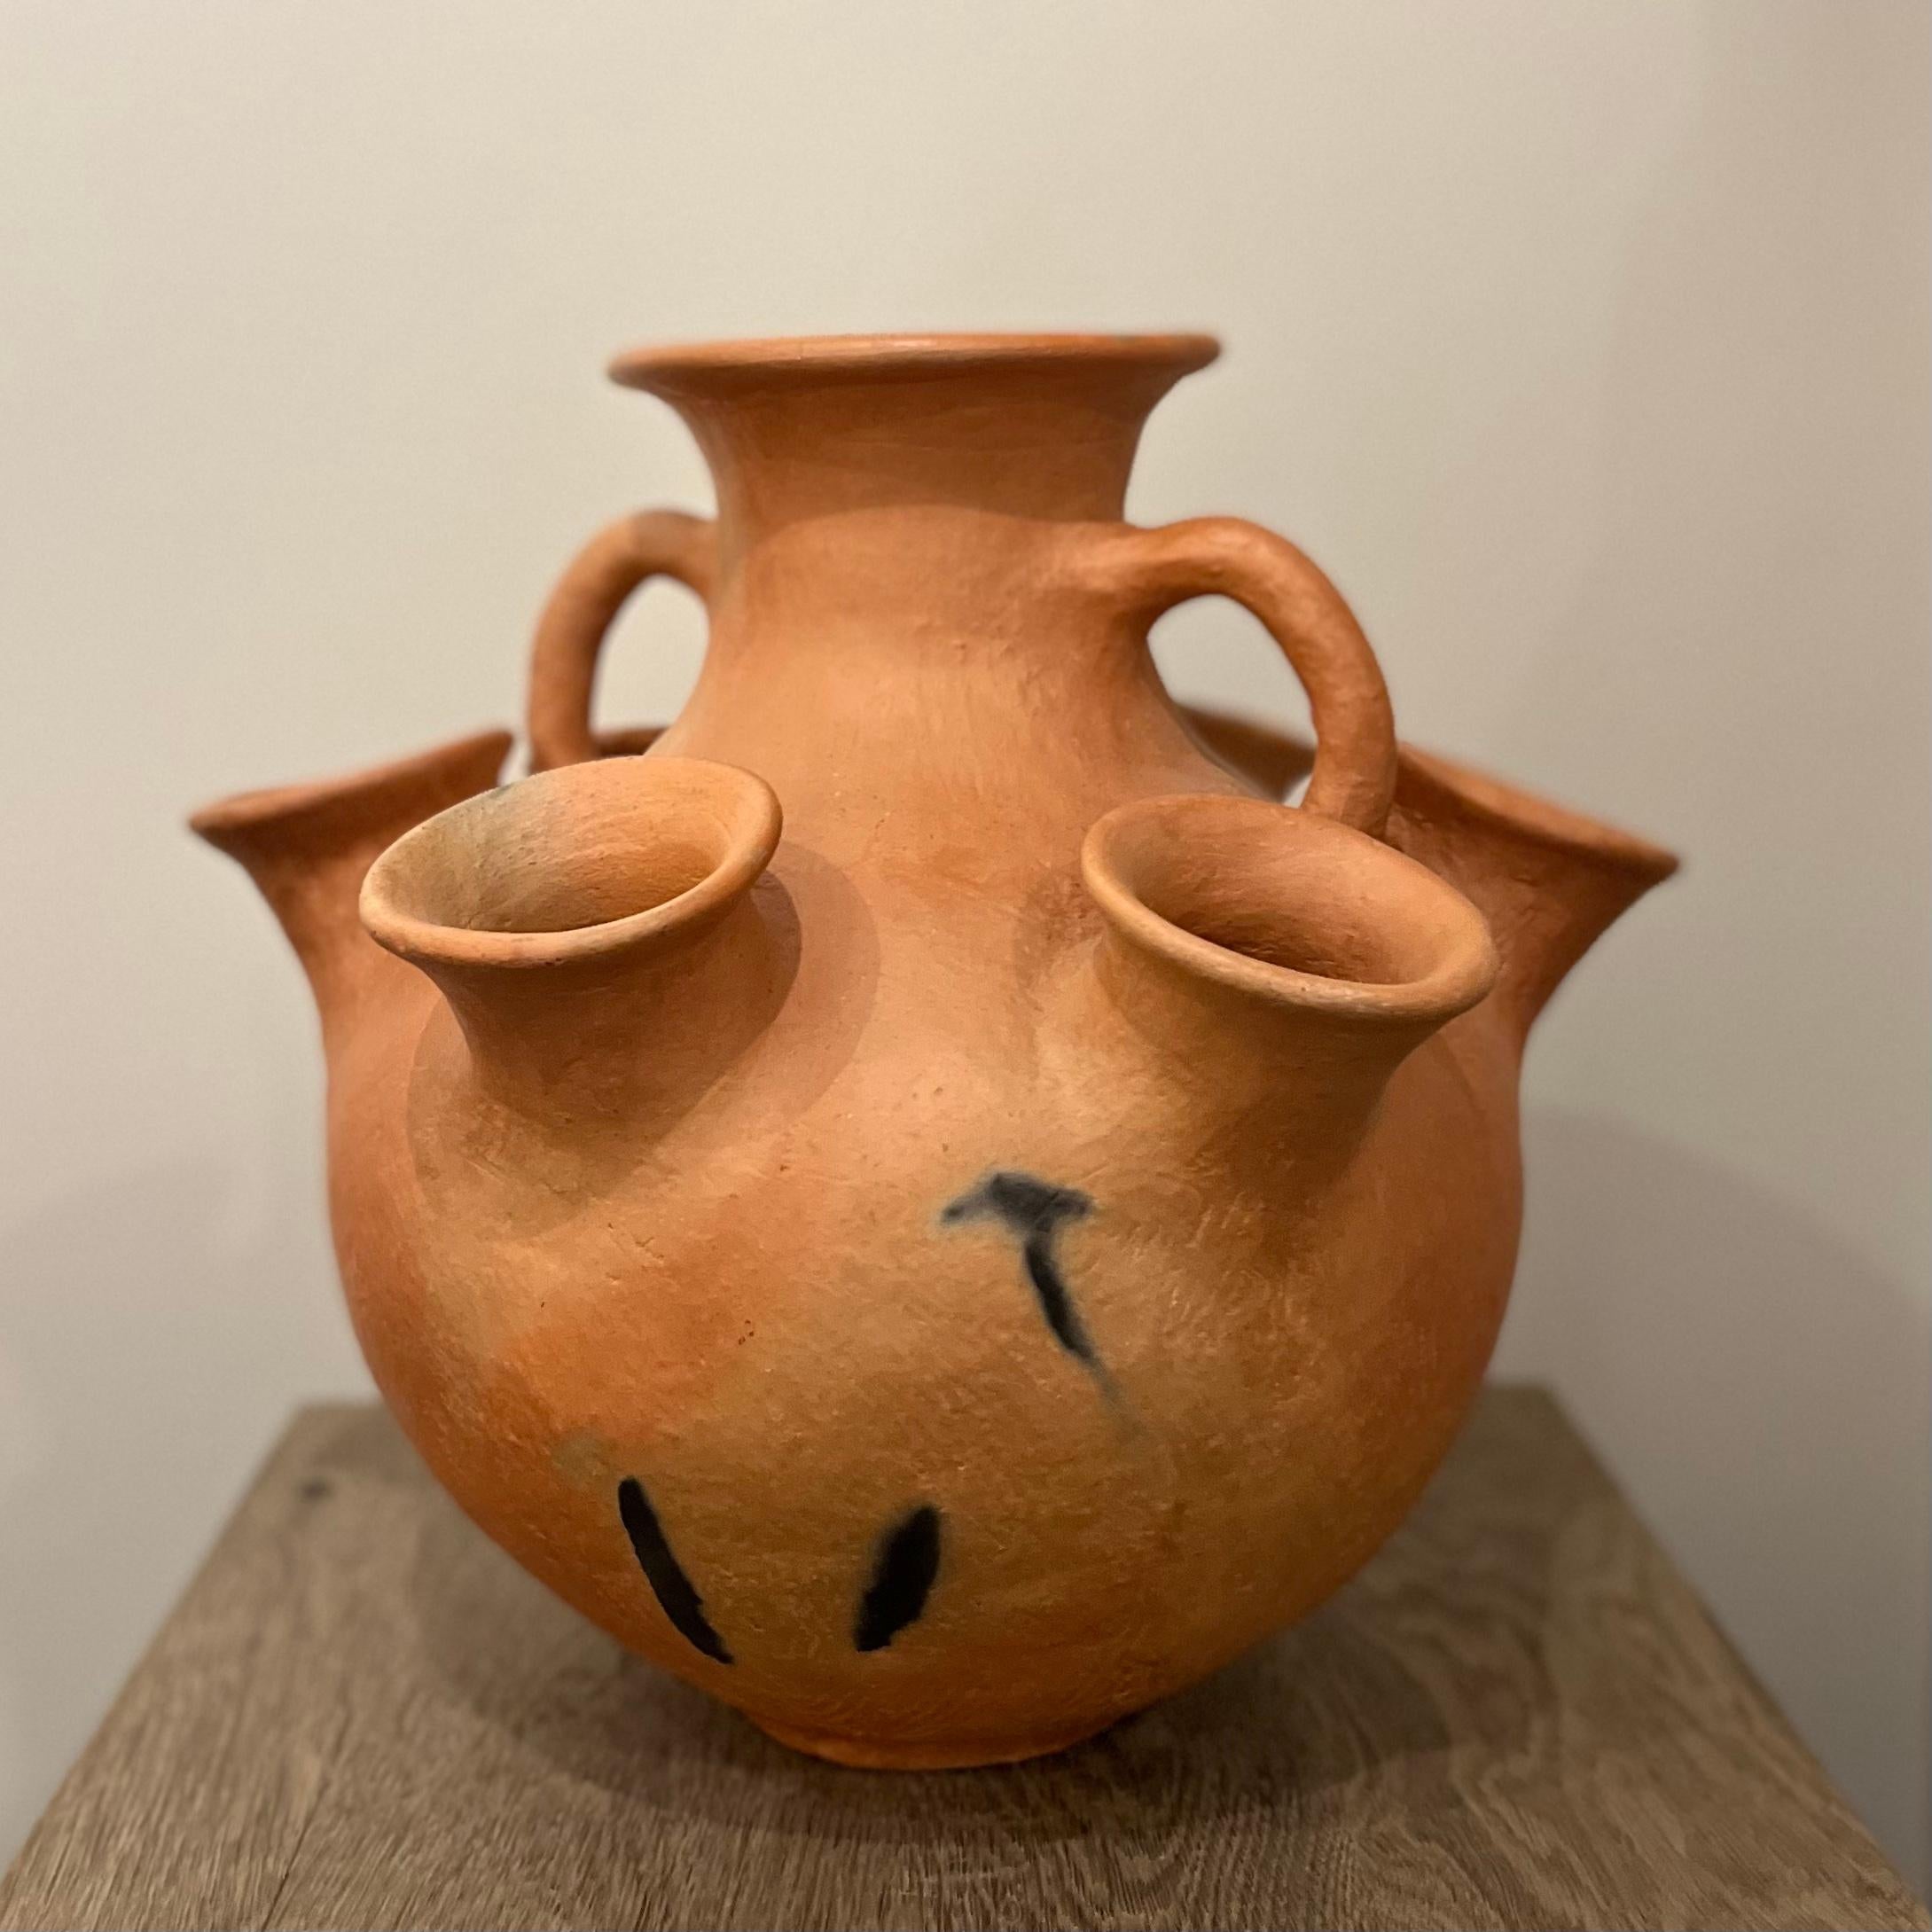 Jarron de Seis Bocas. A large terra-cotta clay vase from Oaxaca, Mexico. Drawing on ancient techniques and forms, the vessel is an extension of the area's centuries old tradition of pottery making. An earthy and sensual addition to any living space,